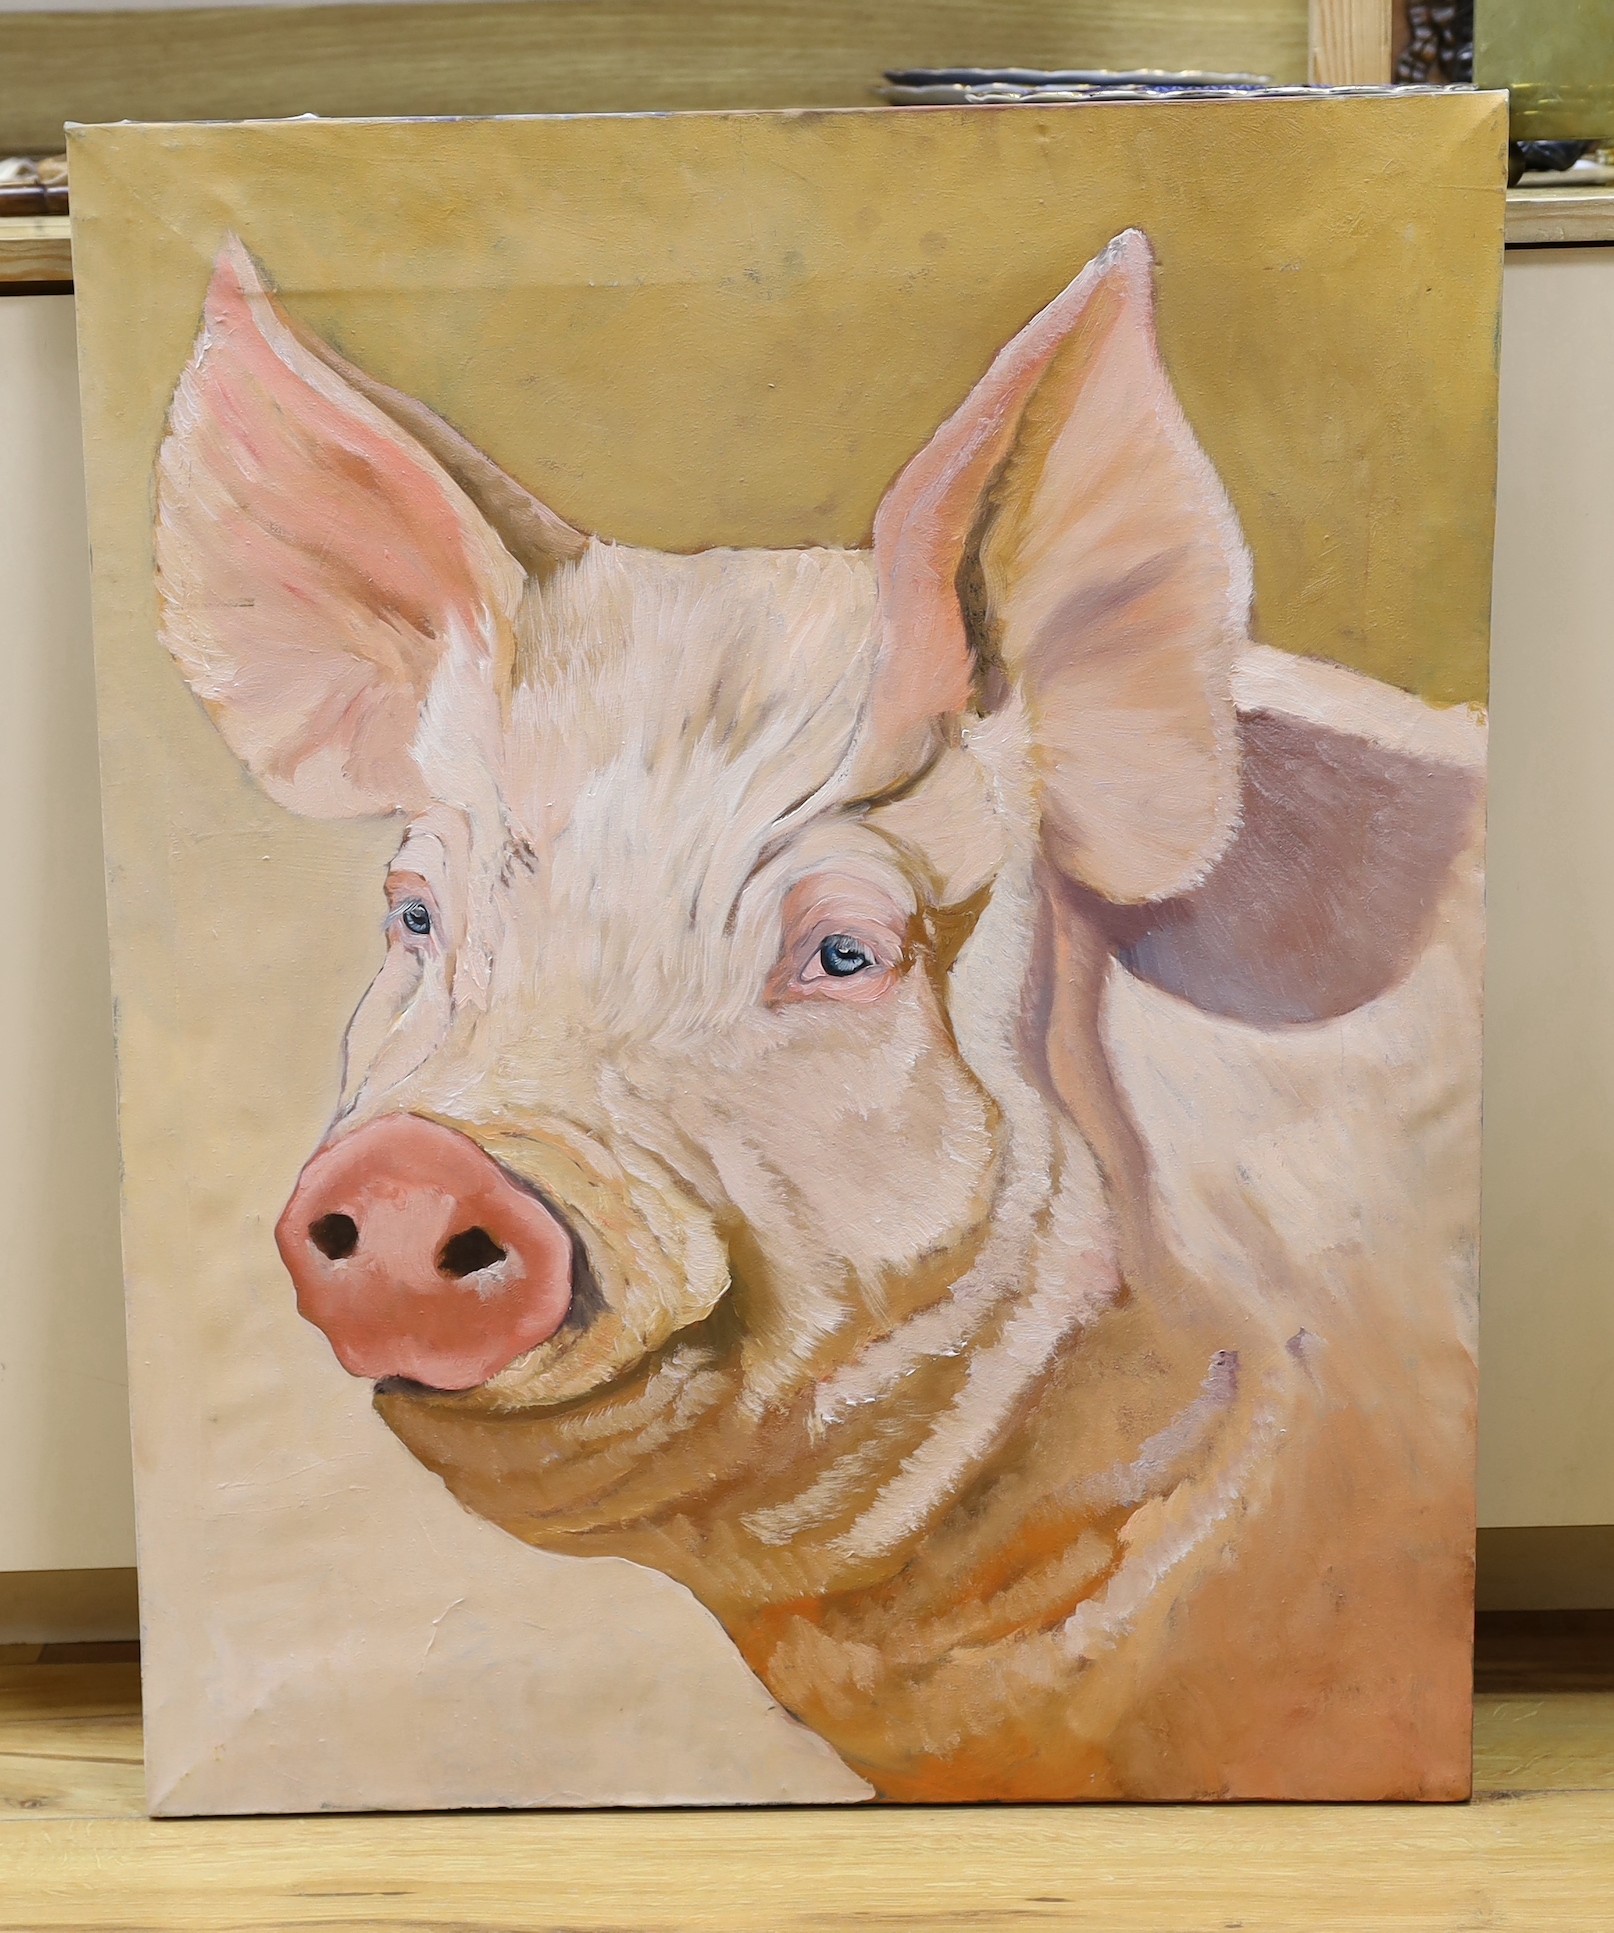 Modern British, oil on canvas, Head study of a pig, 82 x 66cm, unframed - Image 2 of 3